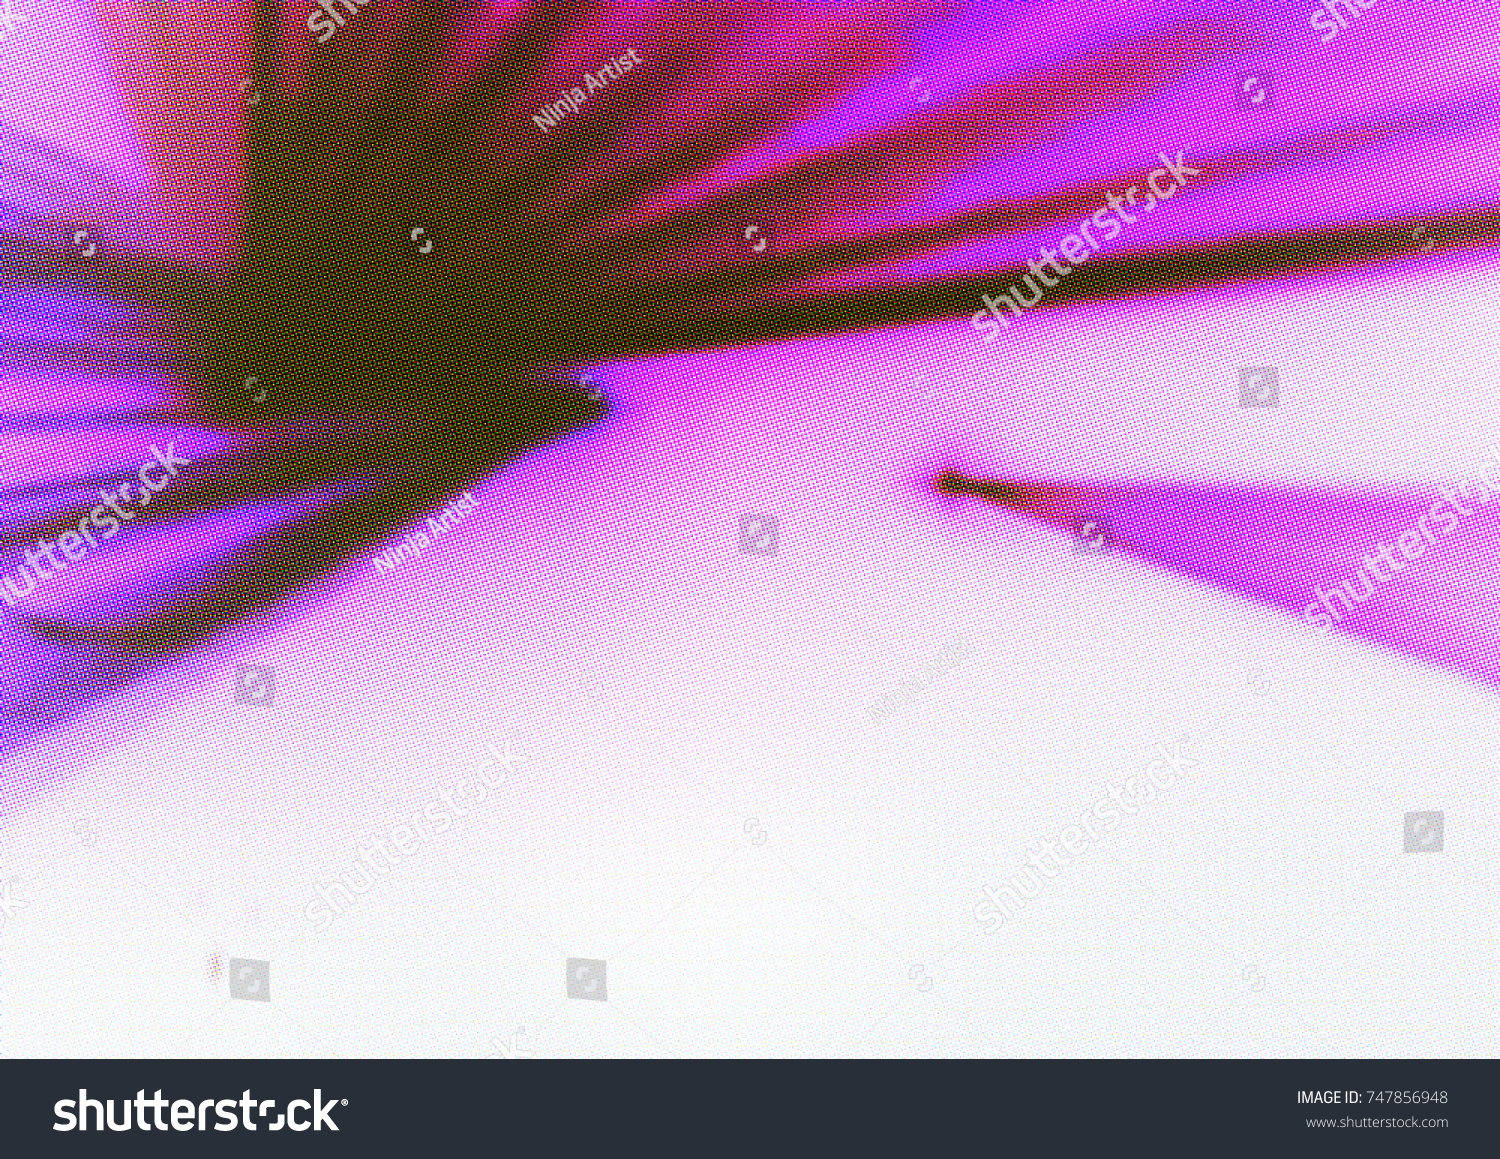 
Colorful lines abstract background can be use as contents background, presentation background or any suitable background or screen sever paper drawing also have copy space for text. #747856948